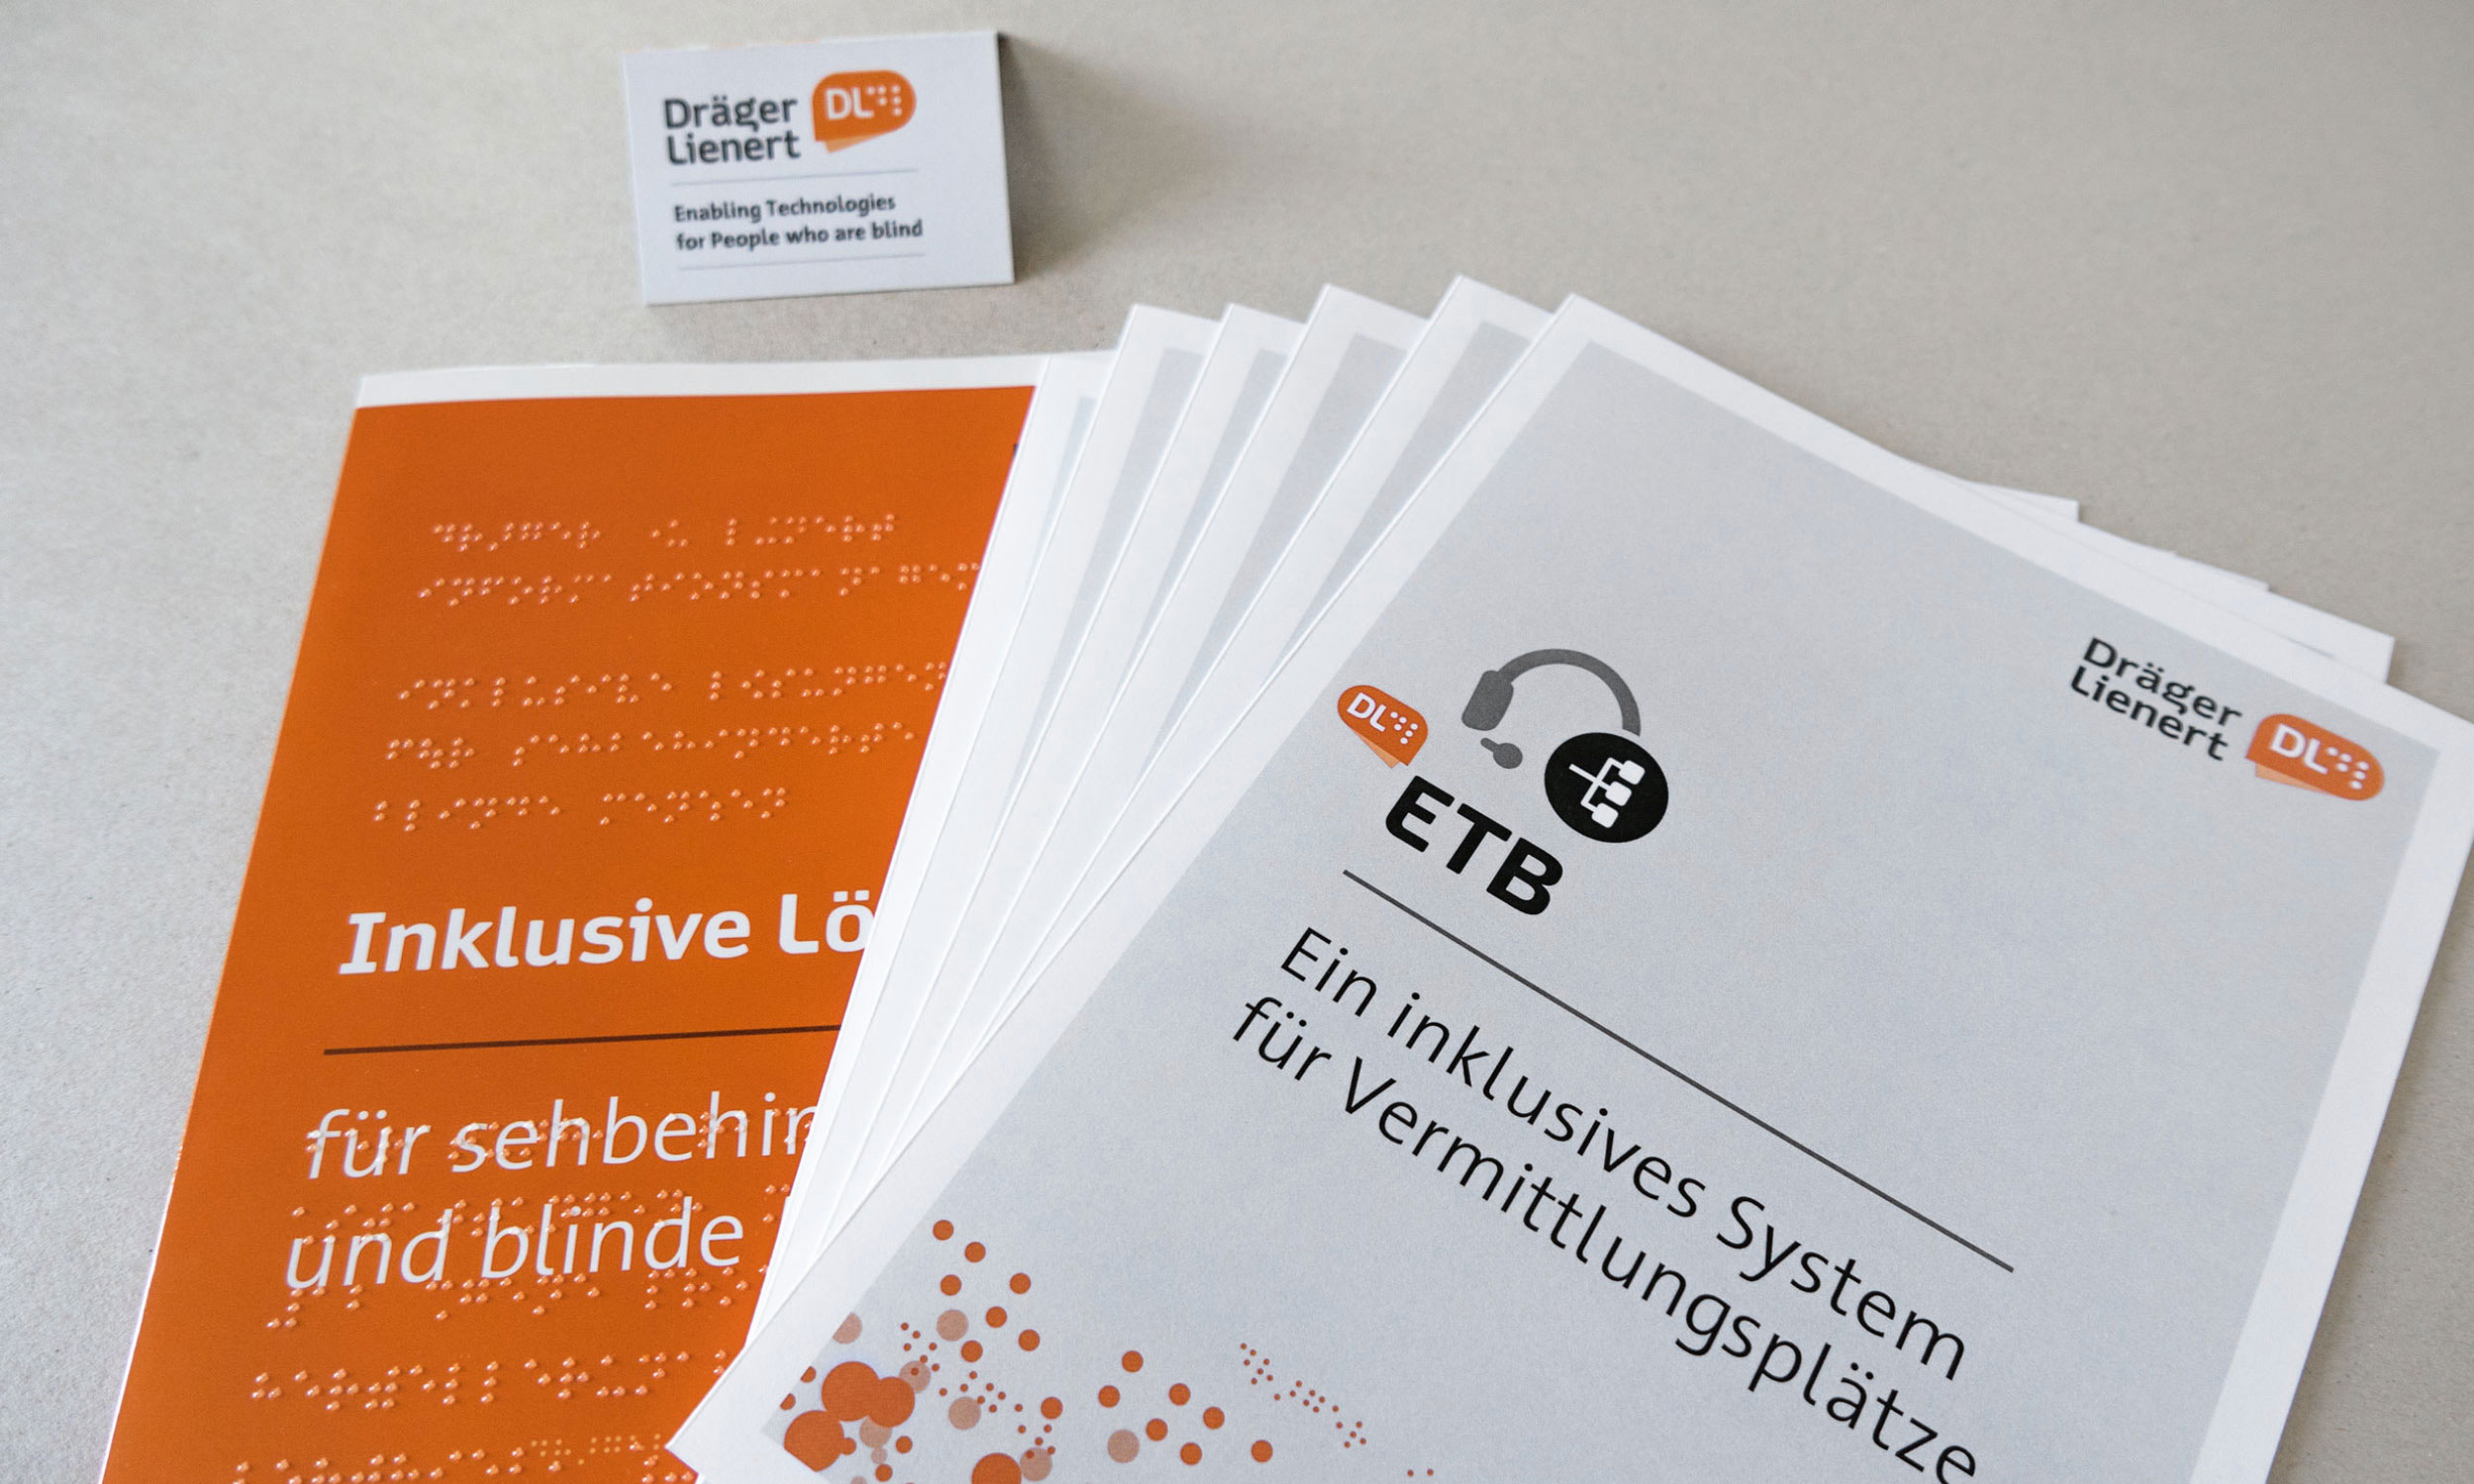 Detail photo of leaflet titles with logo of the company and a business card.